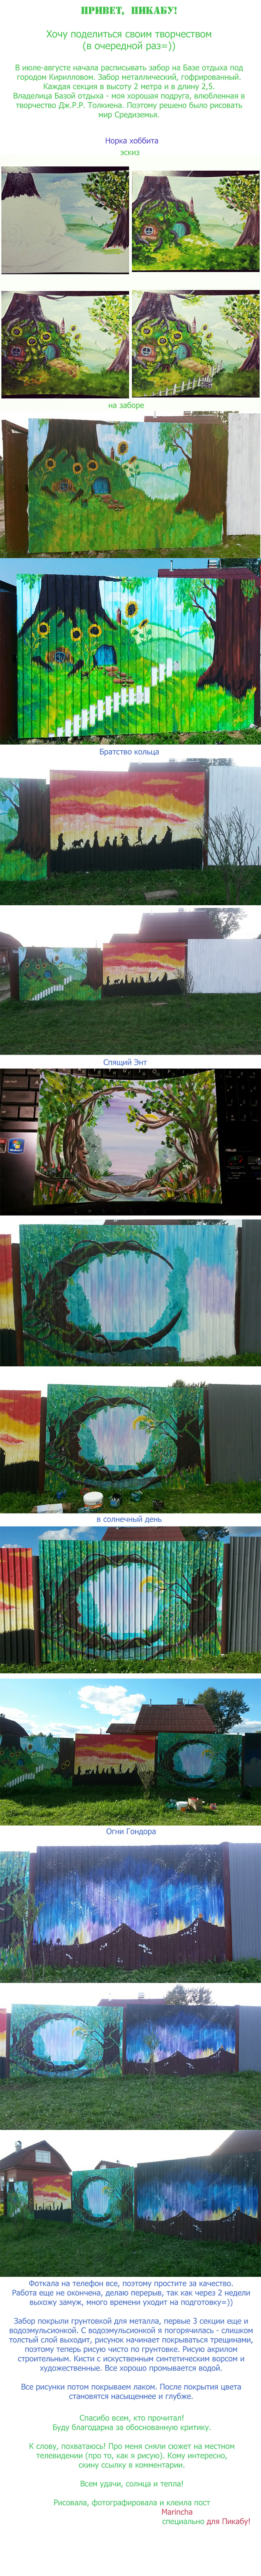 Fence painting based on the book by J.R.R. Tolkien The Lord of the Rings - My, My, Creation, Art, Middle earth, Lord of the Rings, Artist, The hobbit, Hobby, Longpost